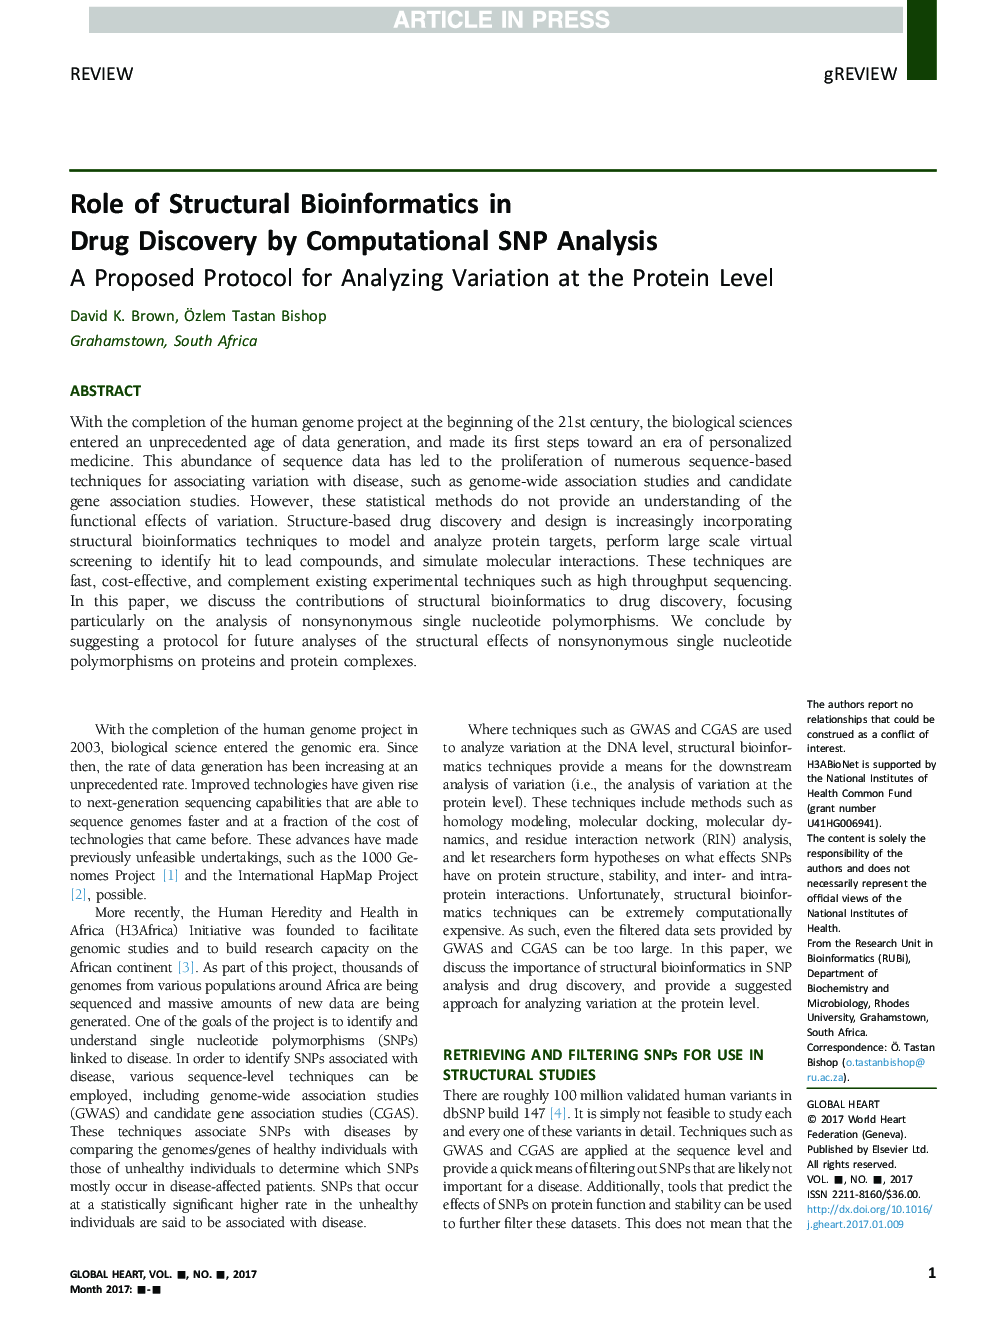 Role of Structural Bioinformatics in Drug Discovery by Computational SNP Analysis